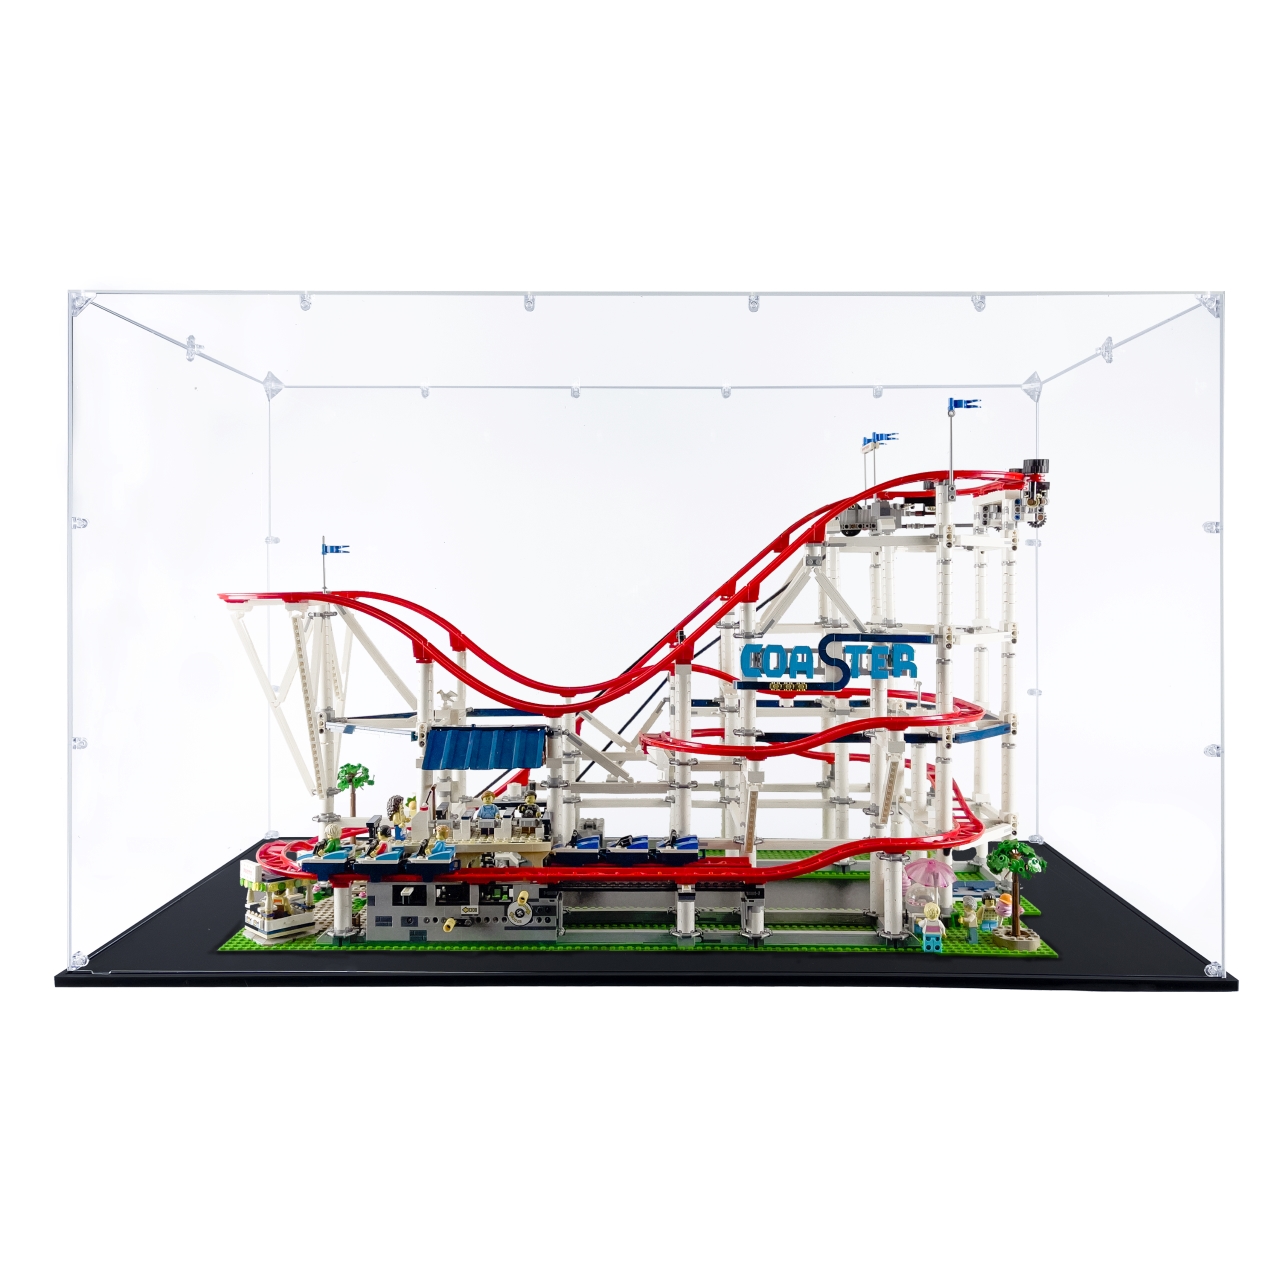 Case for LEGO Roller Coaster #10261 - Songlection